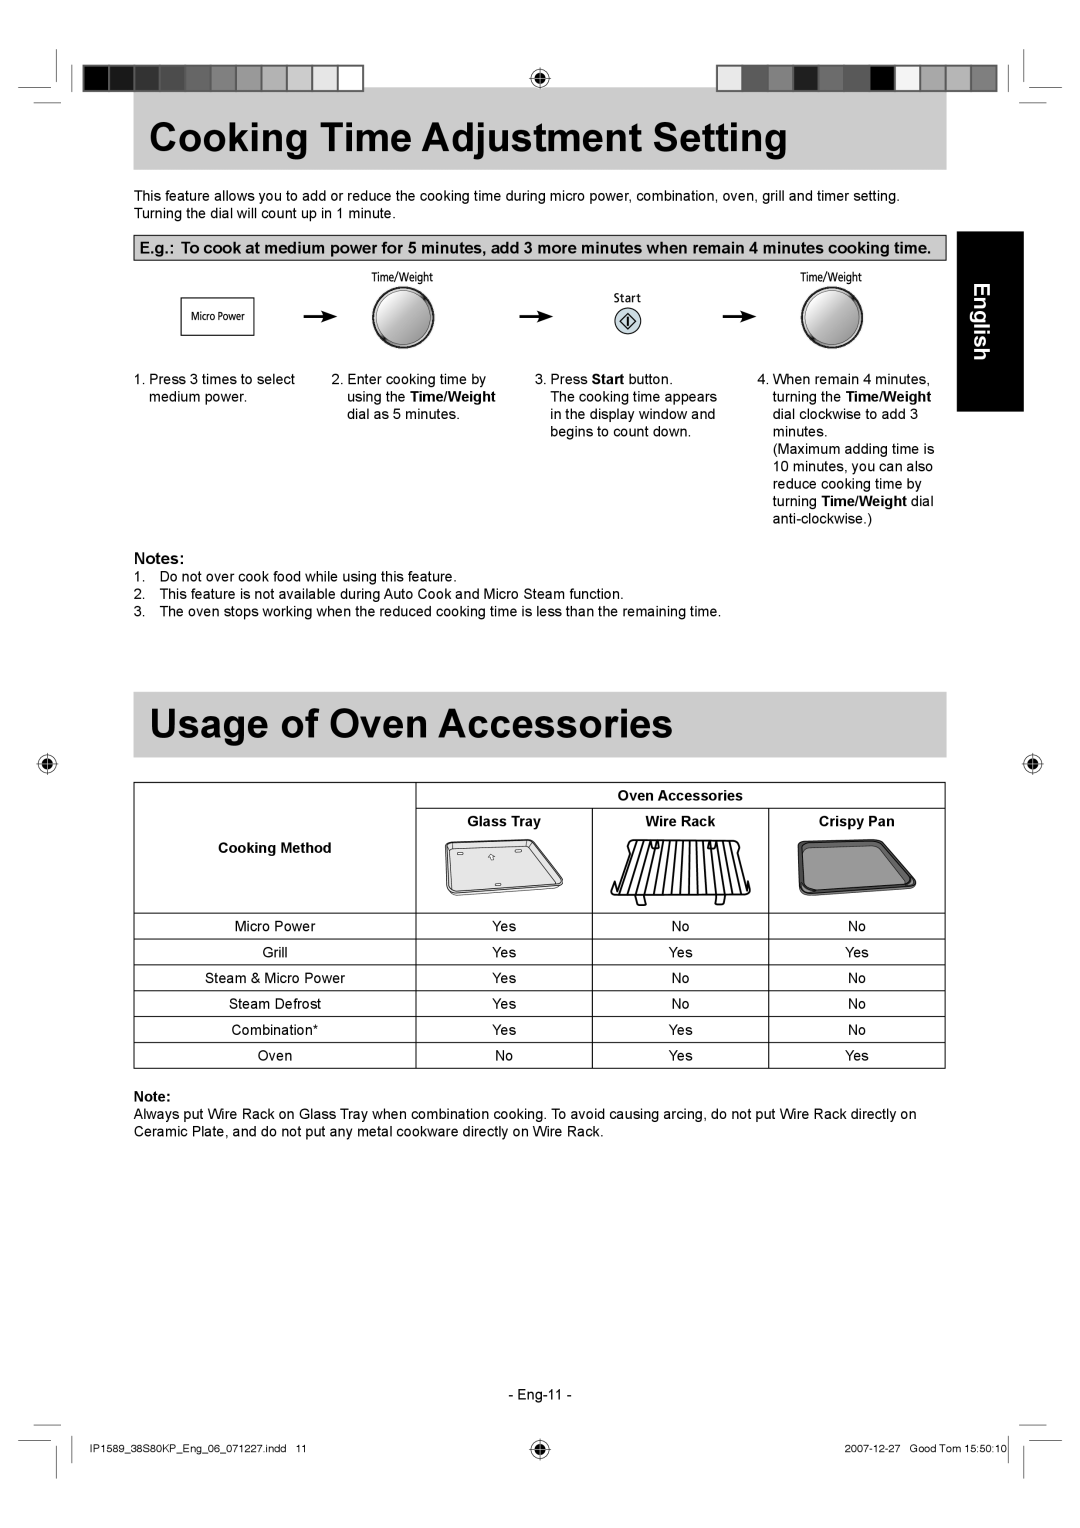 Panasonic NN-GS597M operating instructions Cooking Time Adjustment Setting, Usage of Oven Accessories, English 